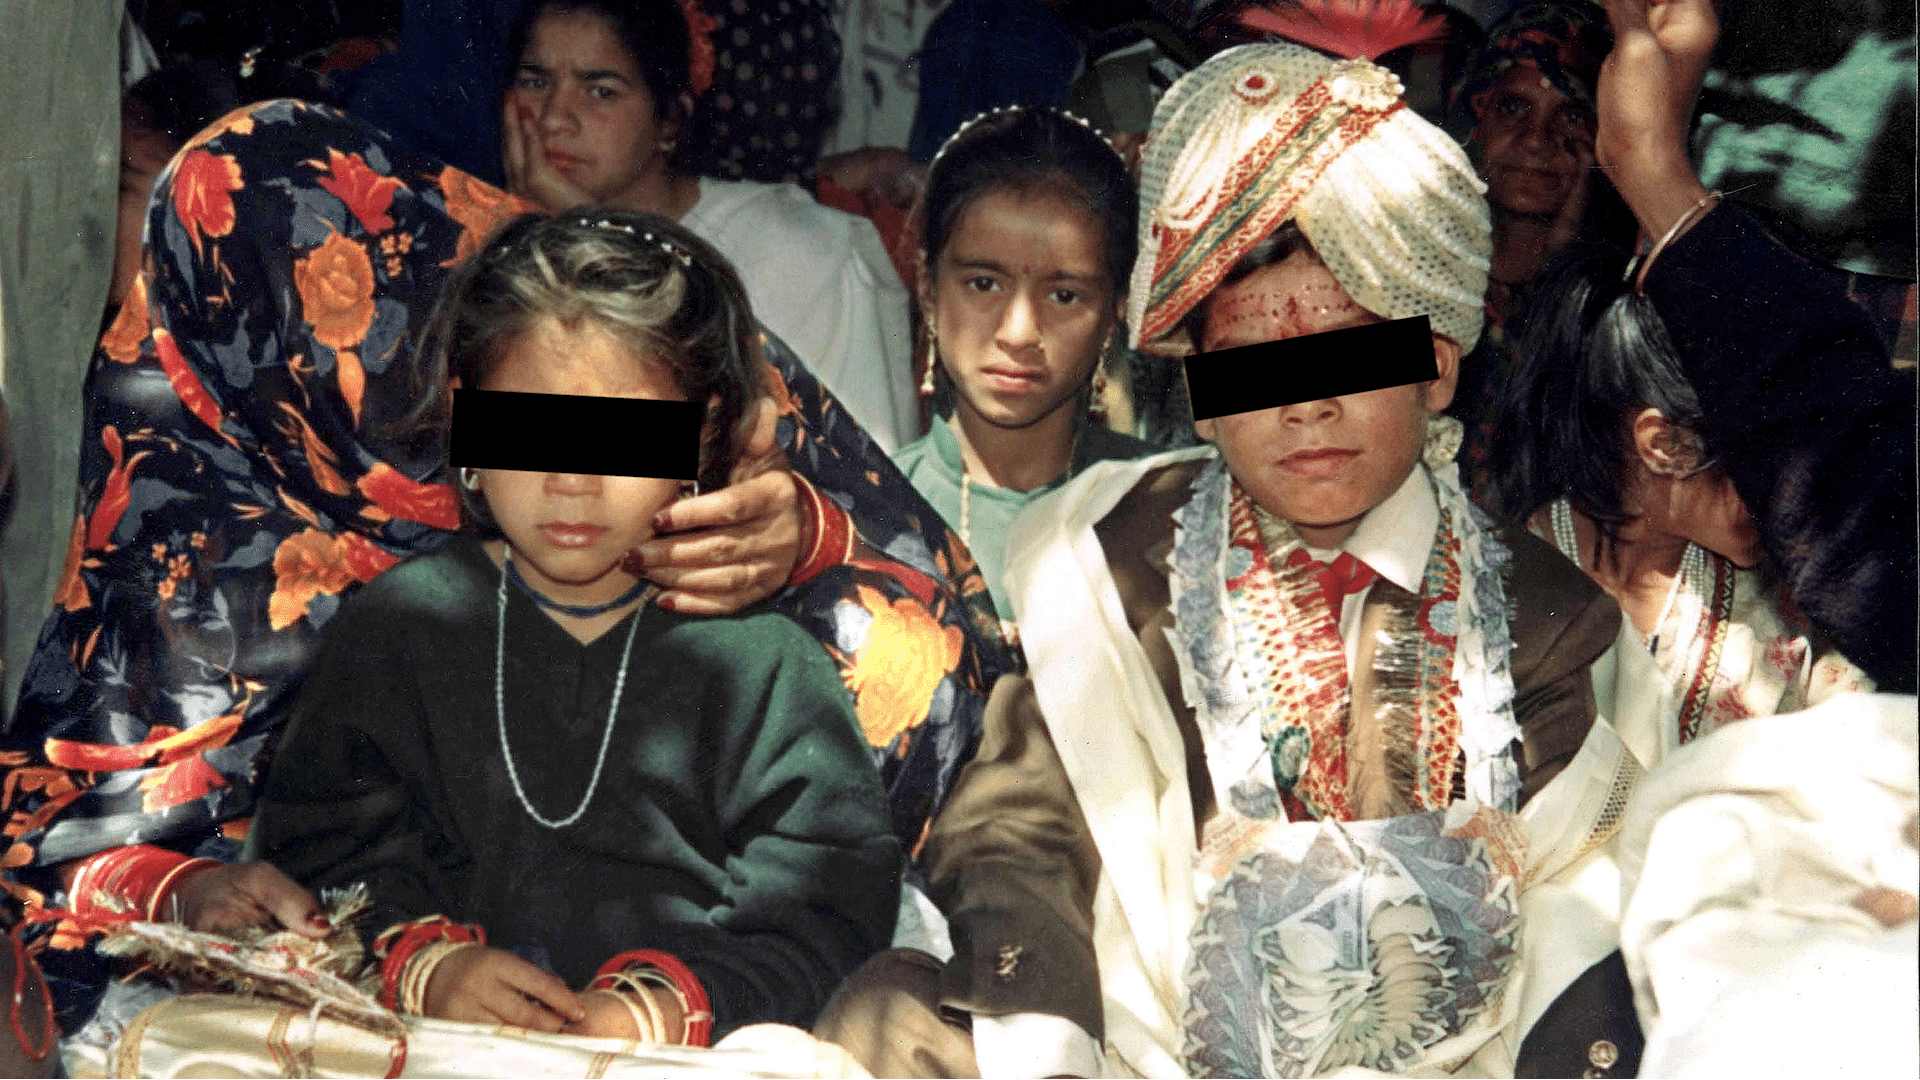 No videos, no pictures, but child marriages are happening everywhere, even in the Capital’s backyard, Greater Noida. (Photo: Reuters)